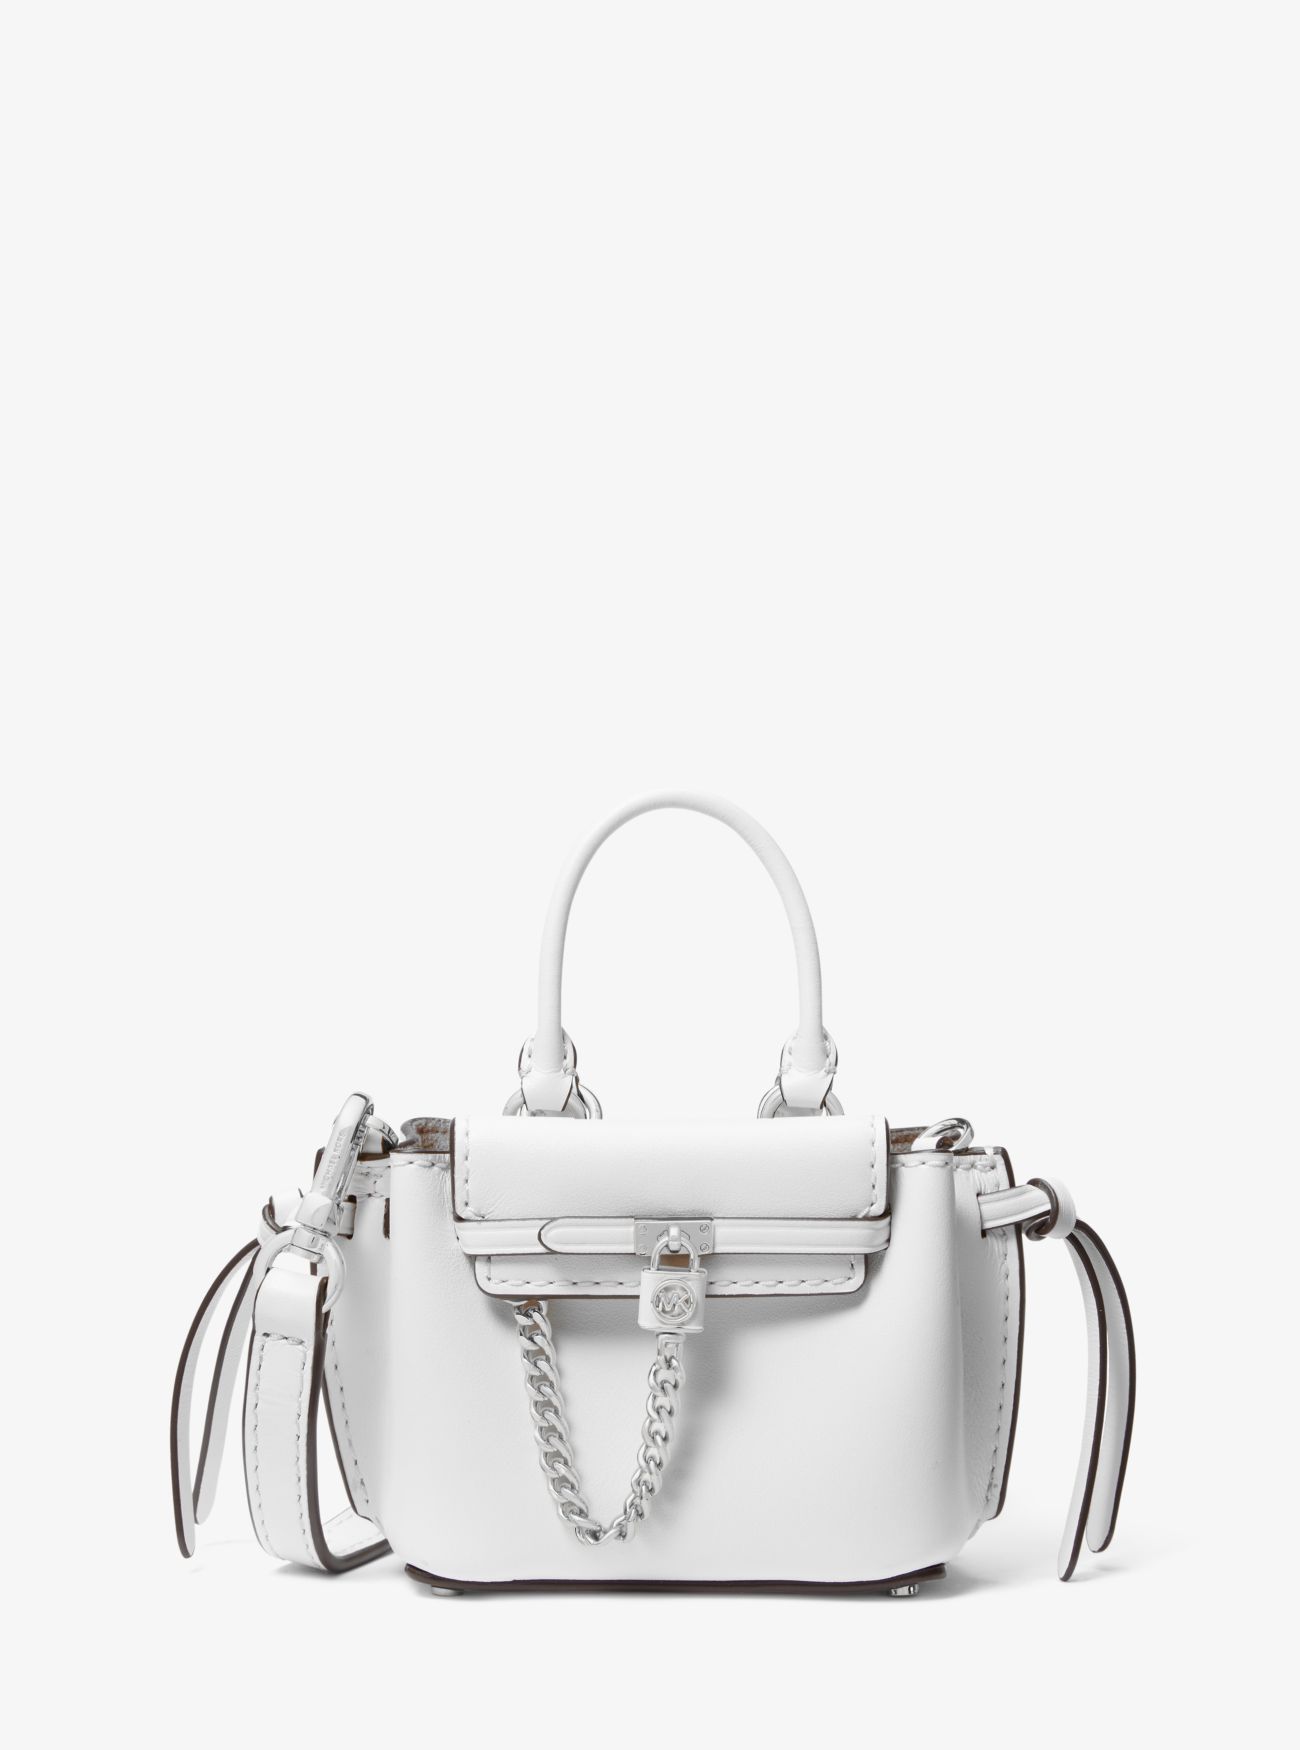 MK Hamilton Legacy Extra-Small Leather Belted Satchel - Optic White - Michael Kors